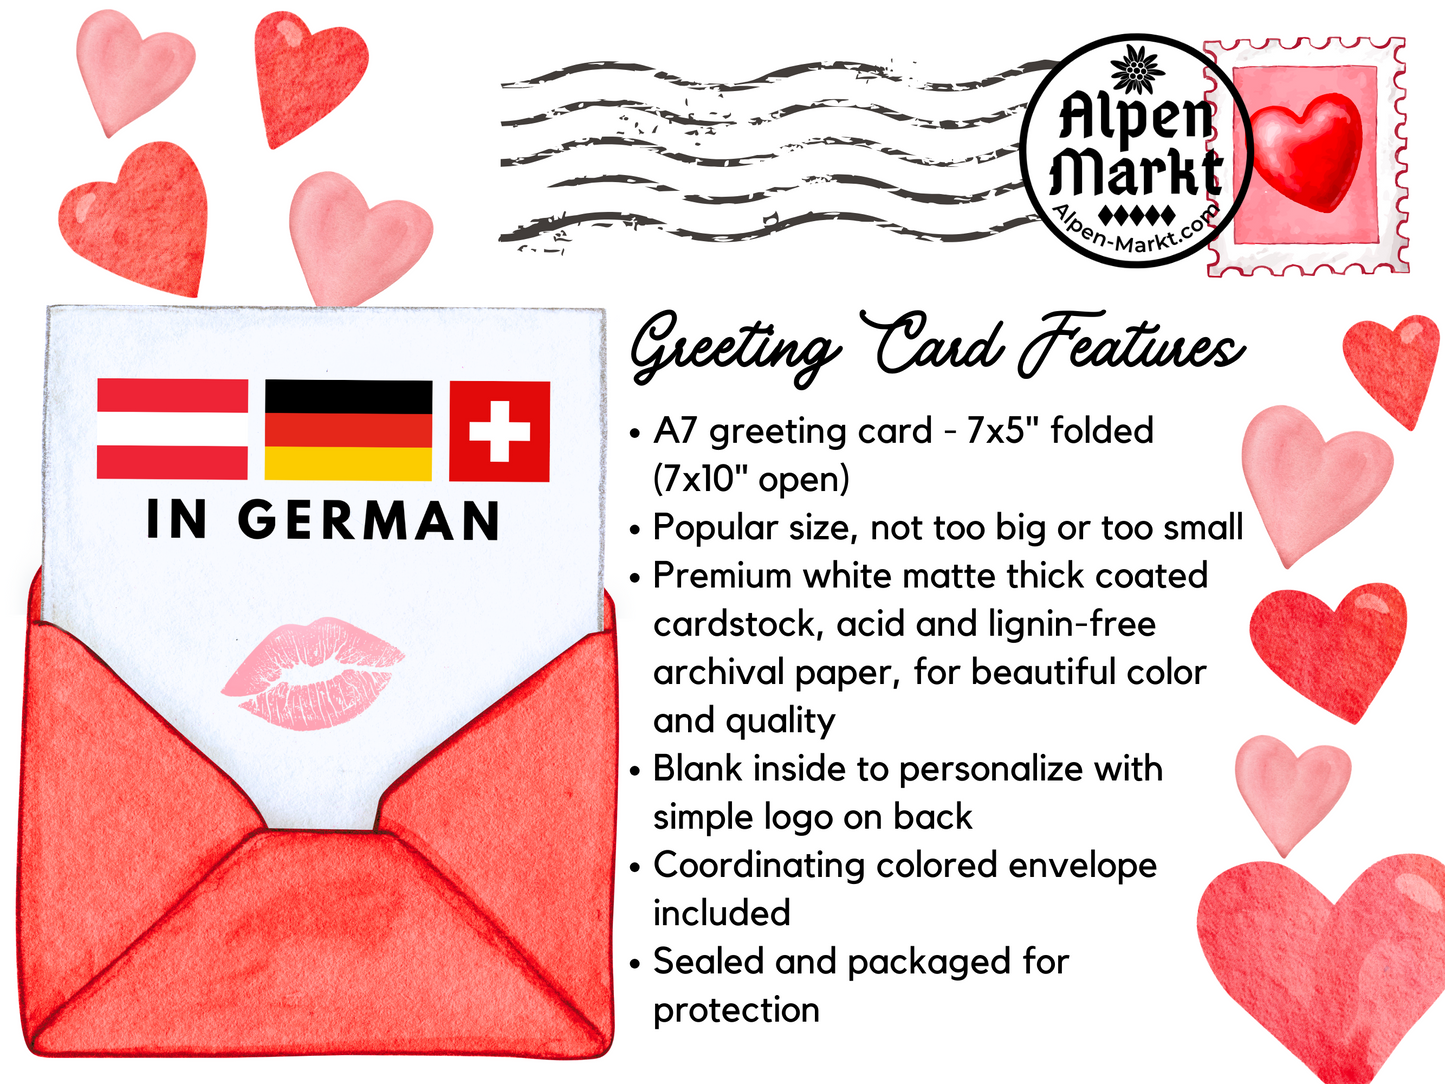 Love Letters German Love of My Life Card for Valentine Anniversary or just because